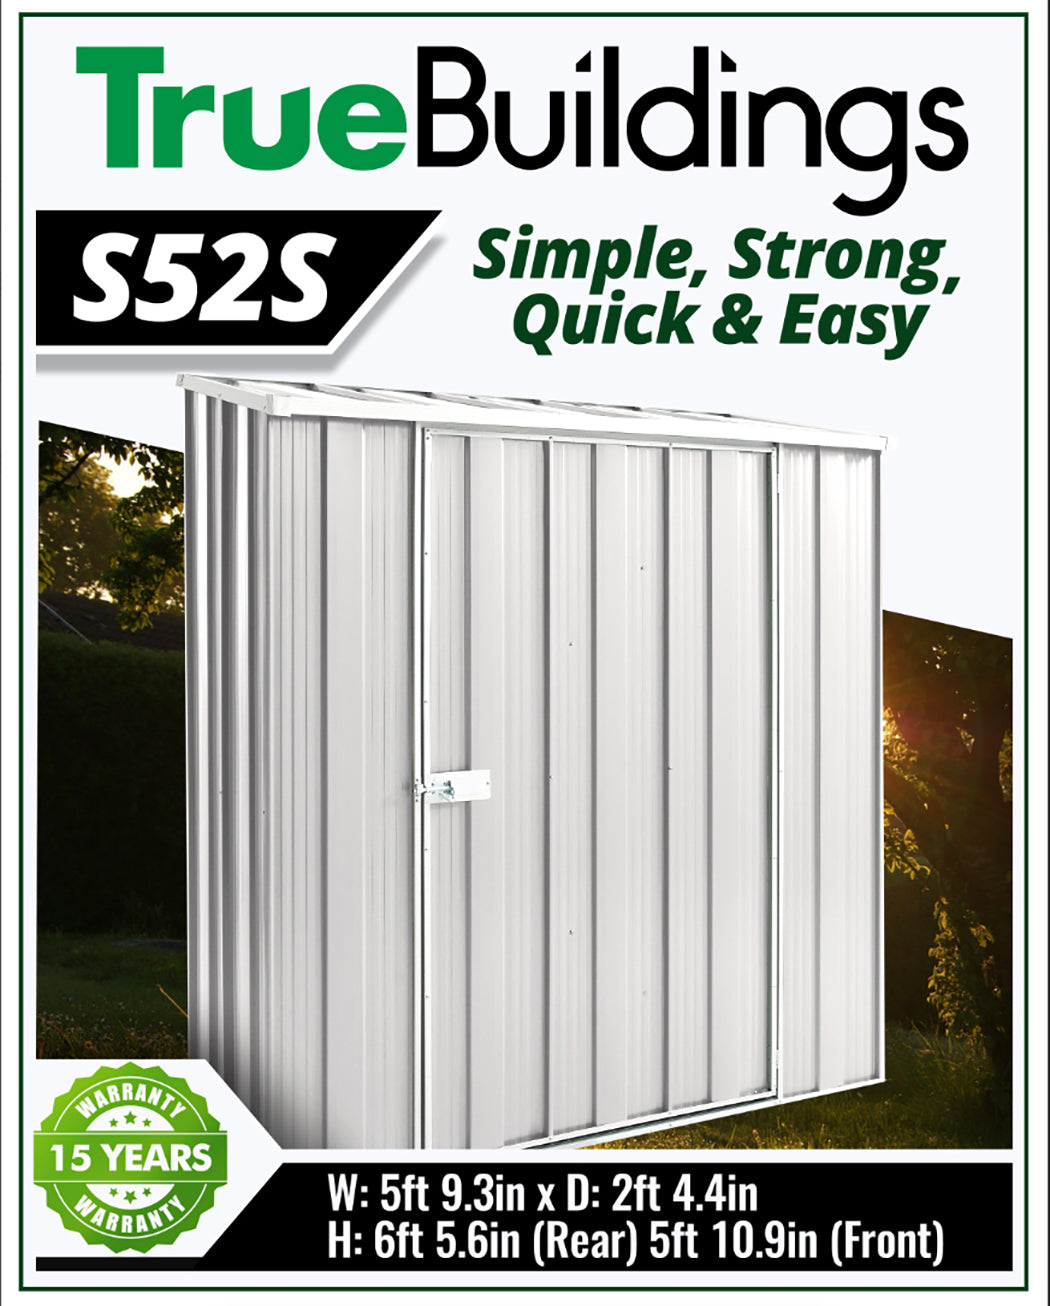 Medium Silver Metal Storage Shed for Garden and Backyard